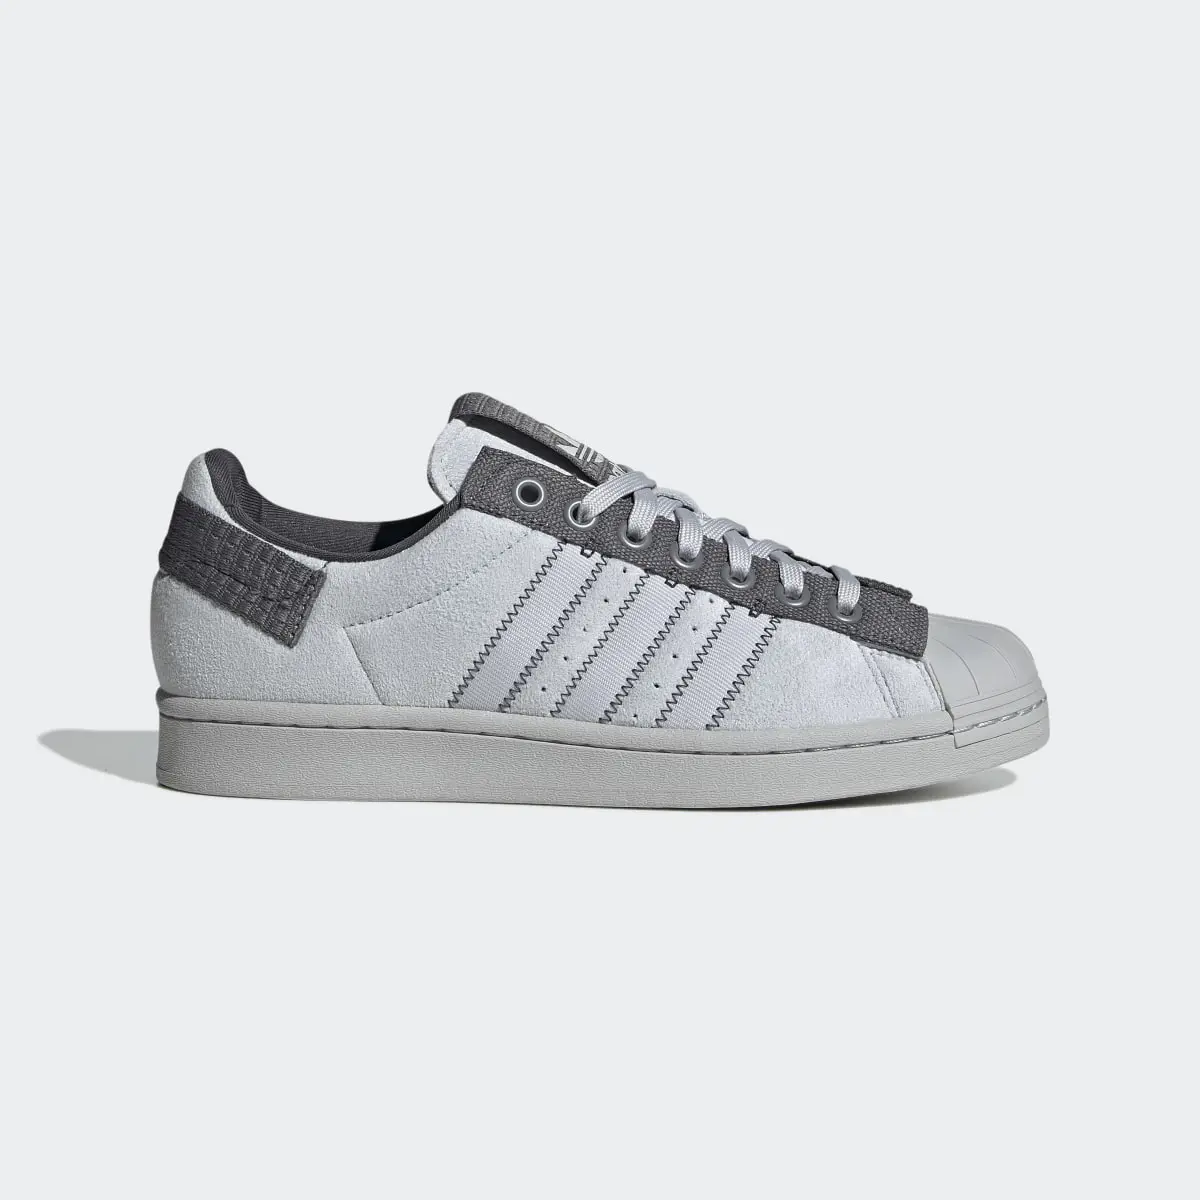 Adidas Superstar Parley Shoes. 2